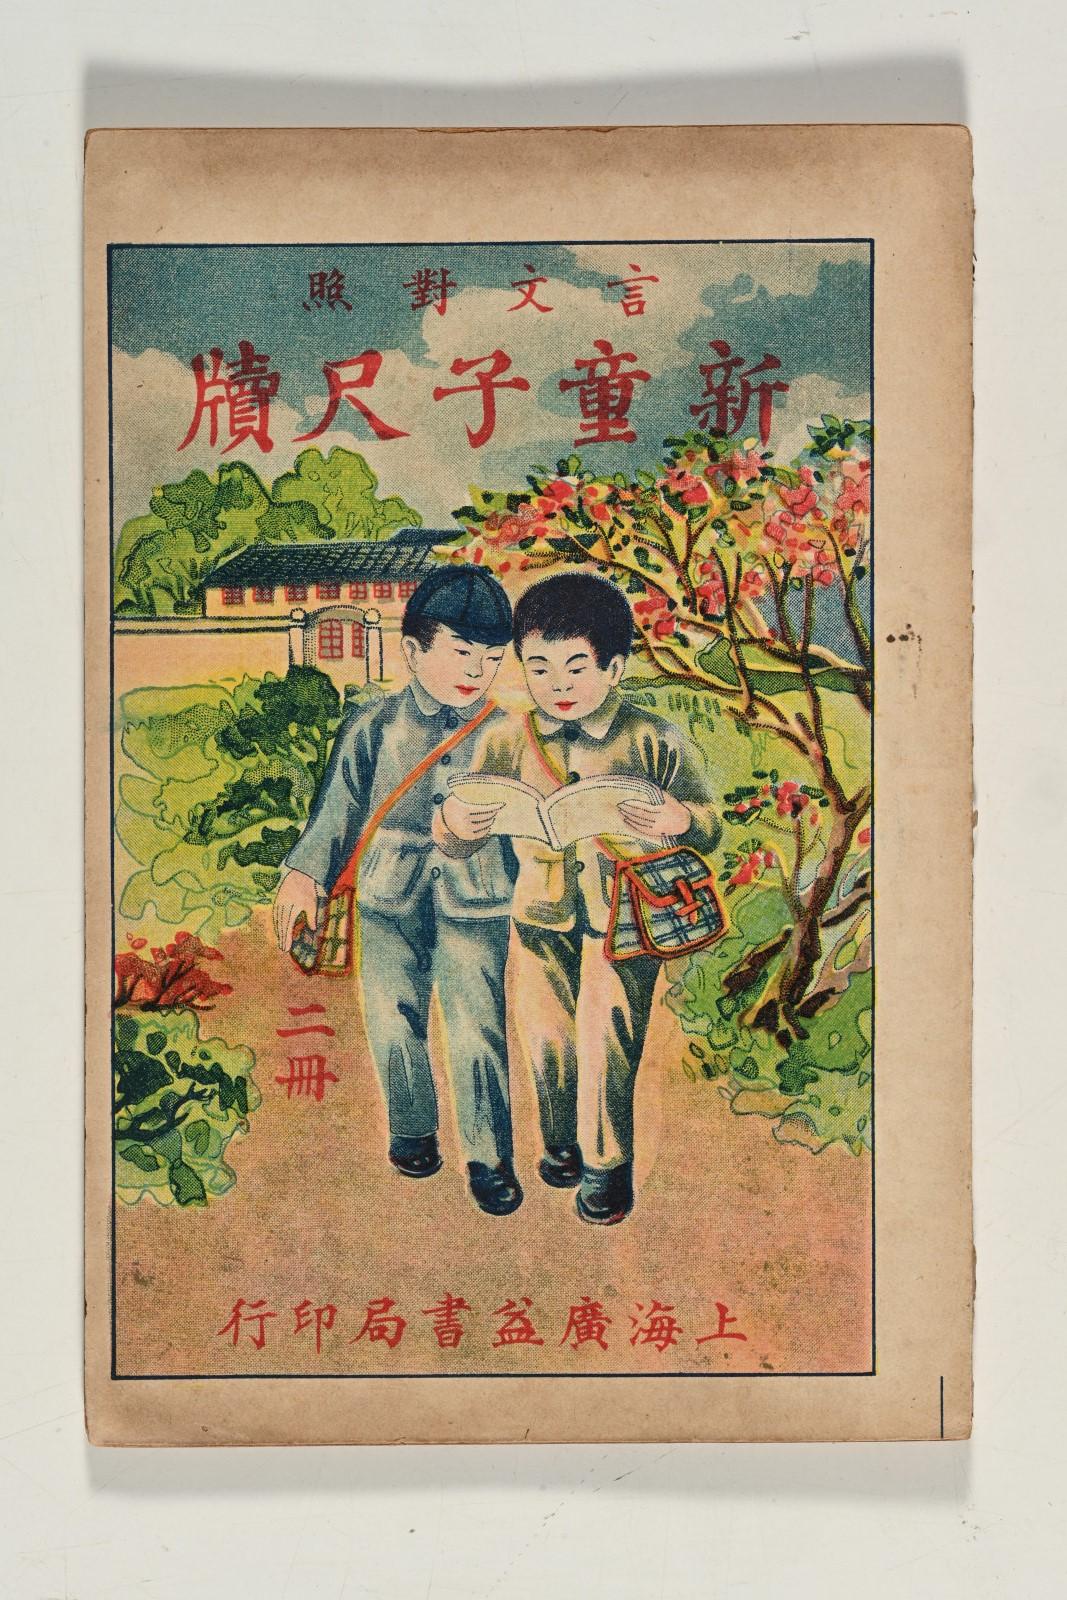 The Dr Sun Yat-sen Museum will launch a new special exhibition, "Learning through play: Old textbooks, toys and games", tomorrow (December 22). Photo shows a Xin Tongzi Chidu ("New letter writing for children") printed by Shanghai Guangyi Bookstore in 1932.